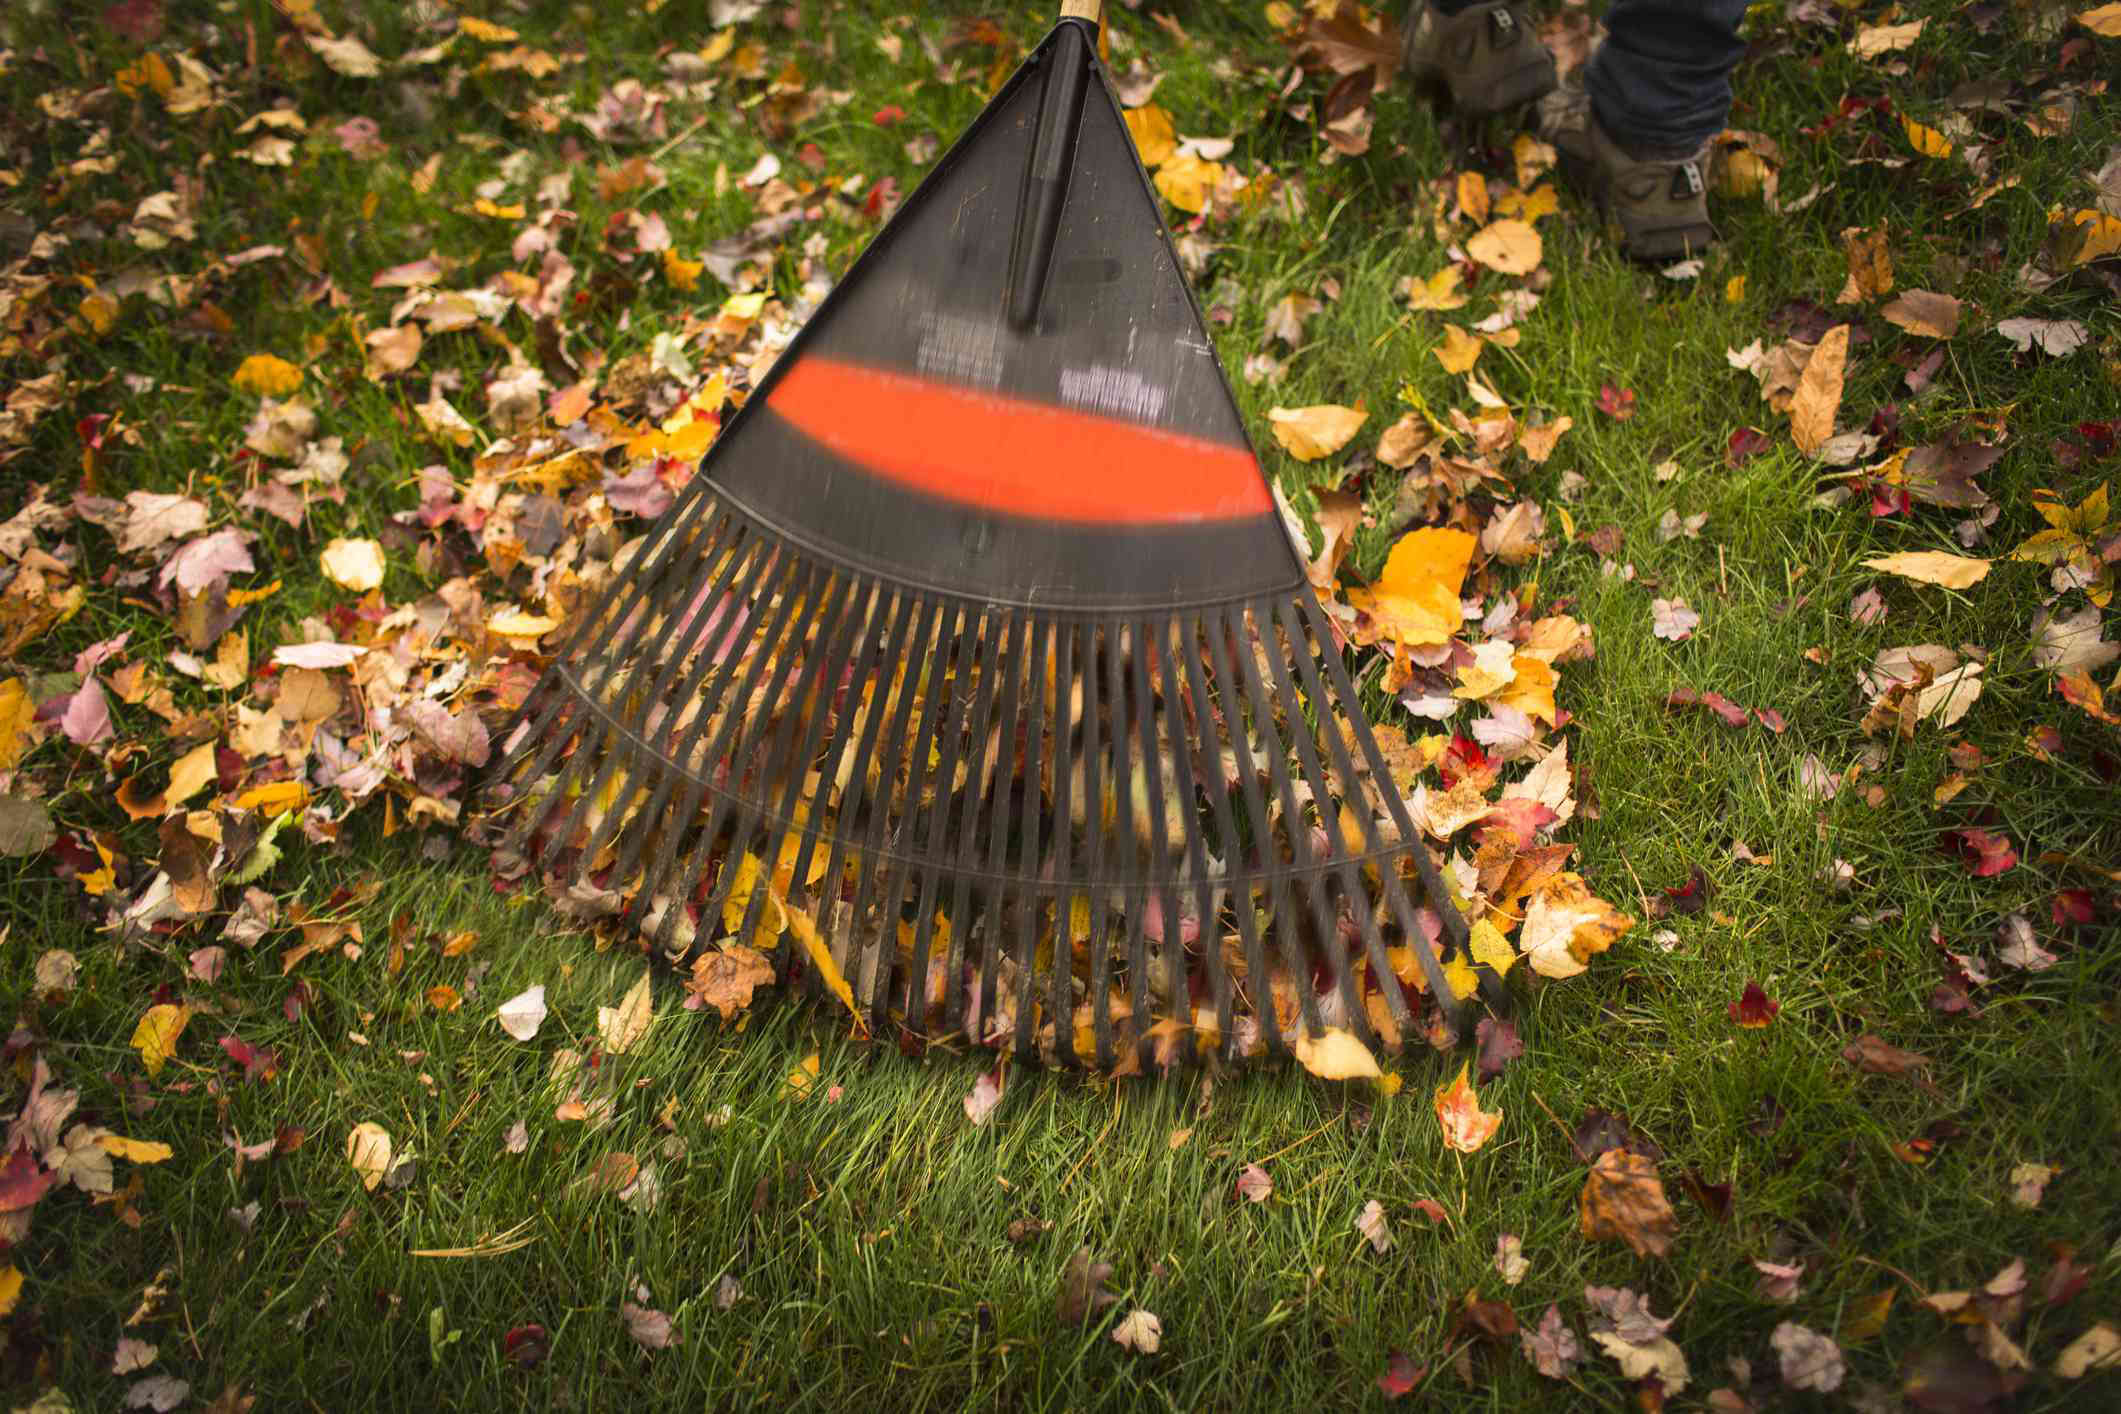 14 Different Types of Rakes and Uses for Each